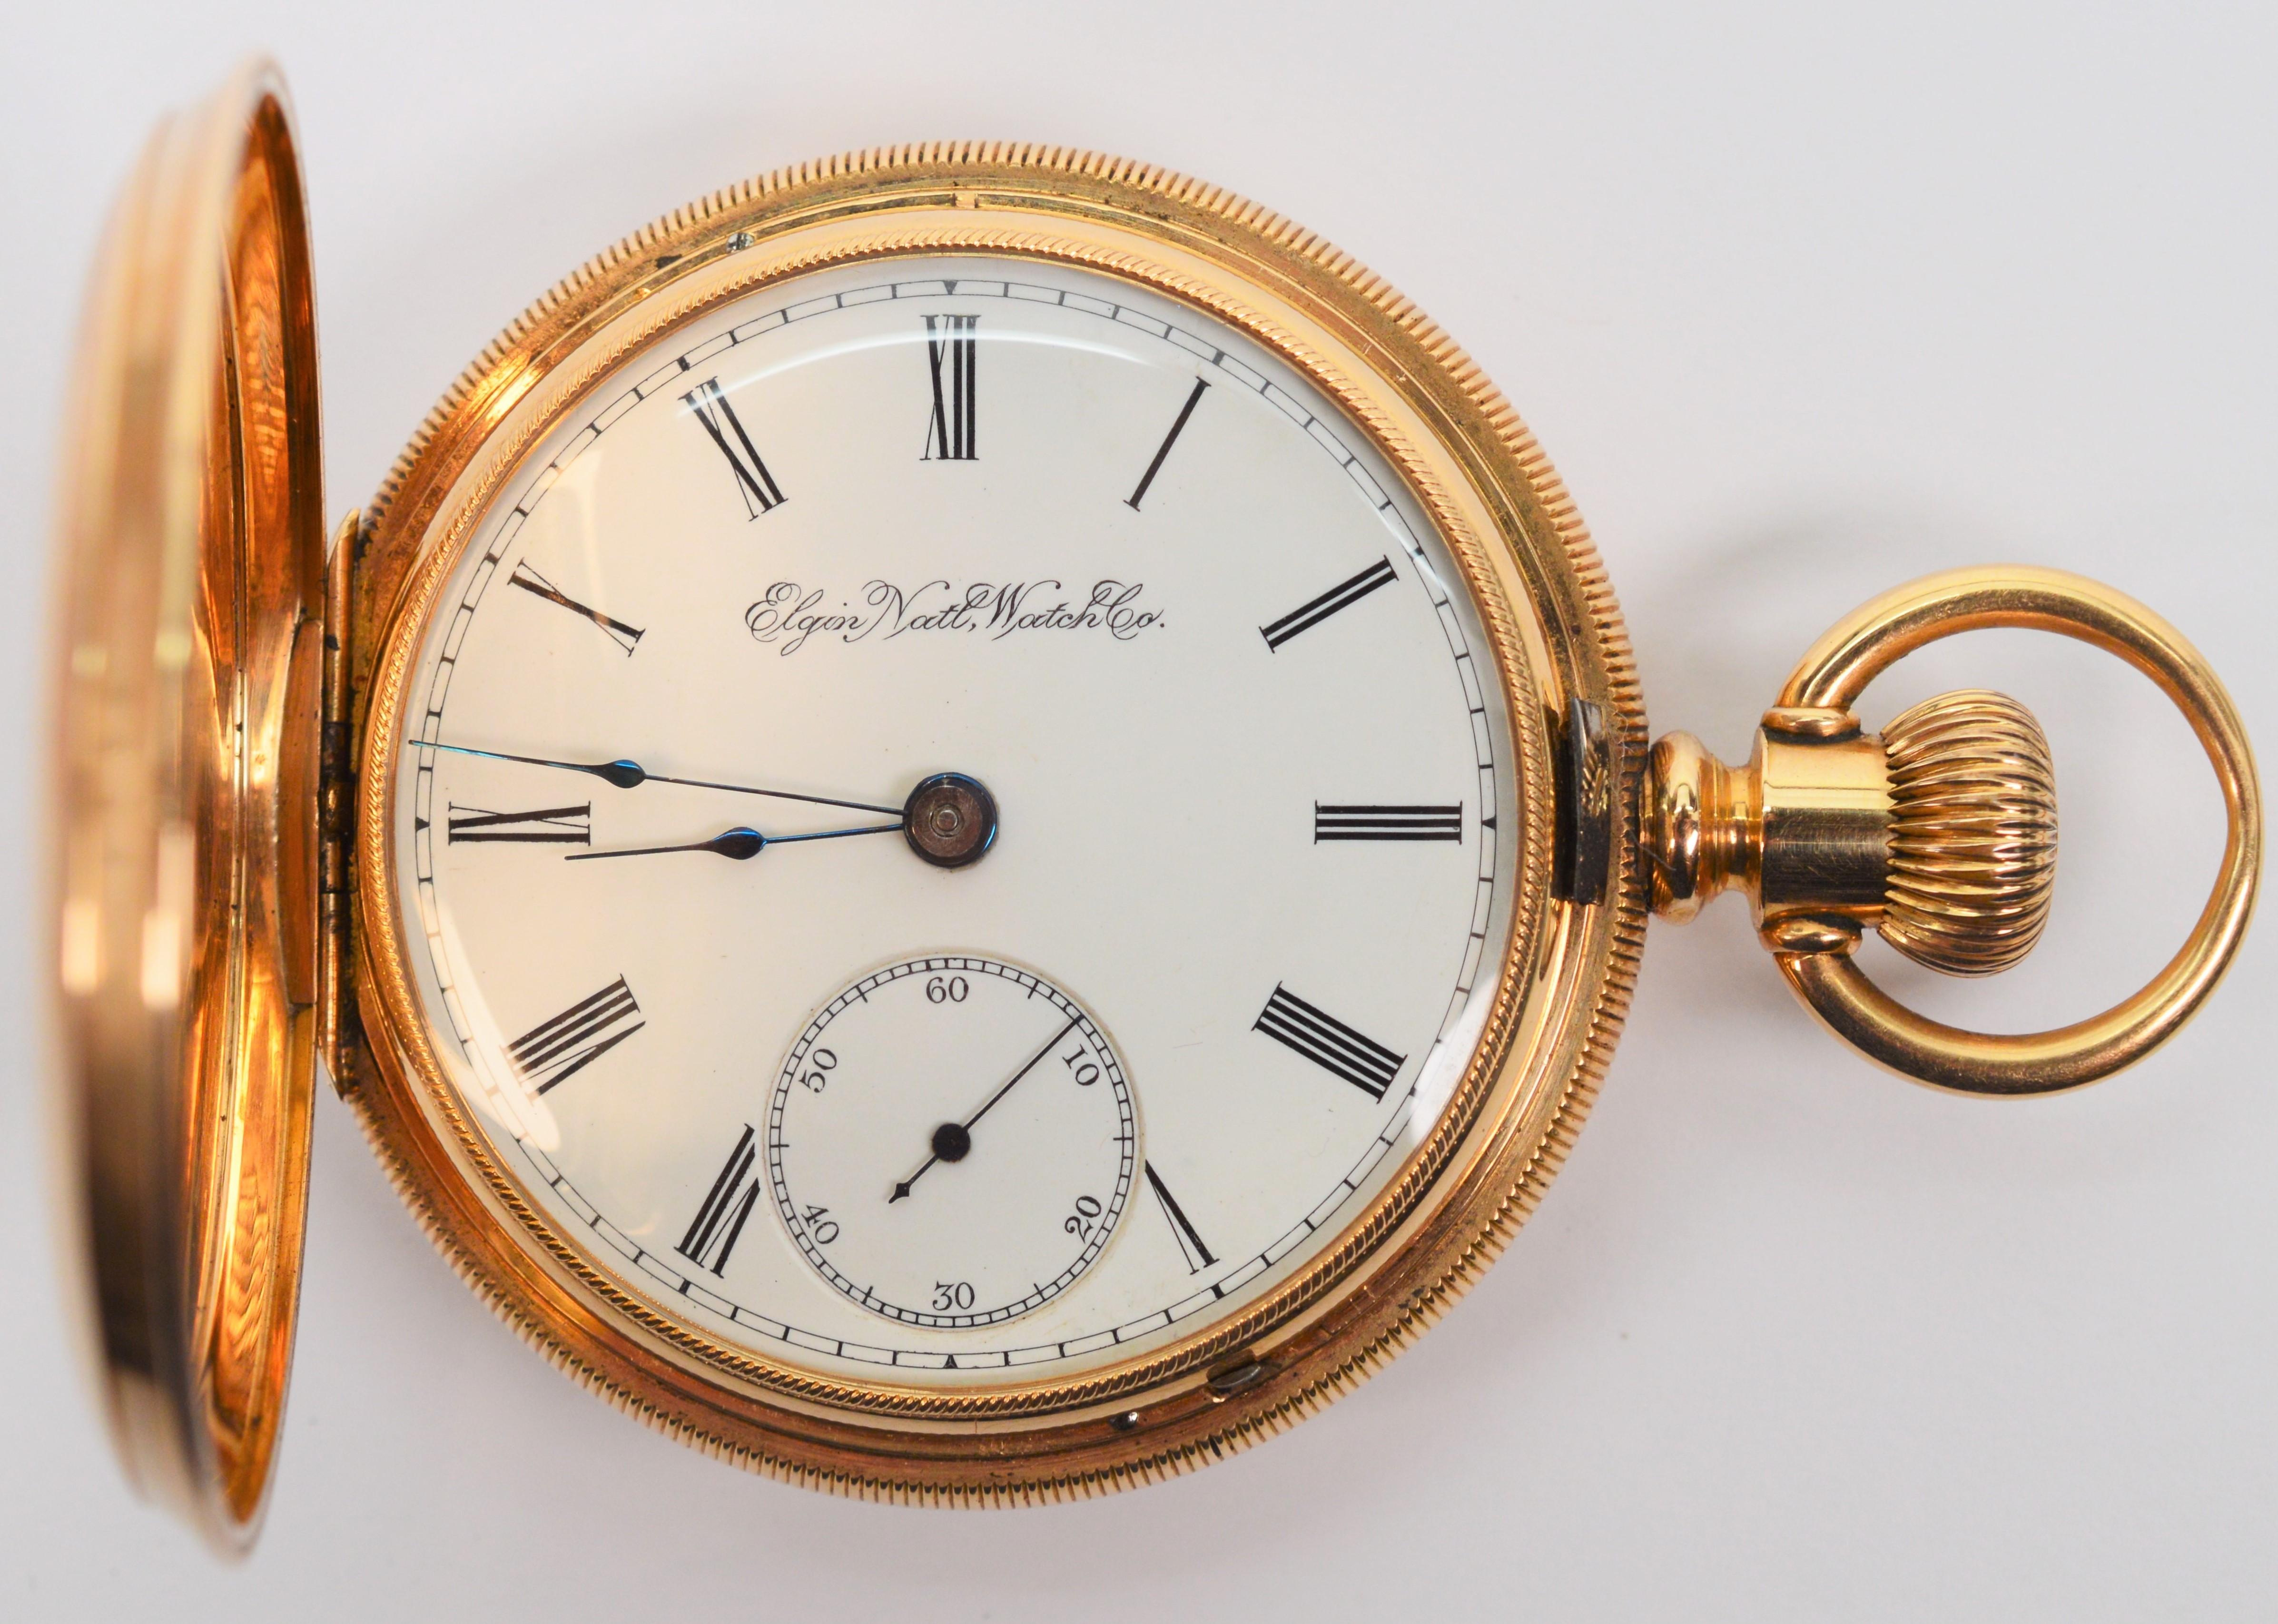 Capture a piece of history in time. This grand 14 karat yellow gold, circa 1891 Elgin National GM Wheeler Grade 103 Model 3 Pocket Watch is a true find.
Manufactured pre-1900 by one of America's most highly respected watch makers of the period, its